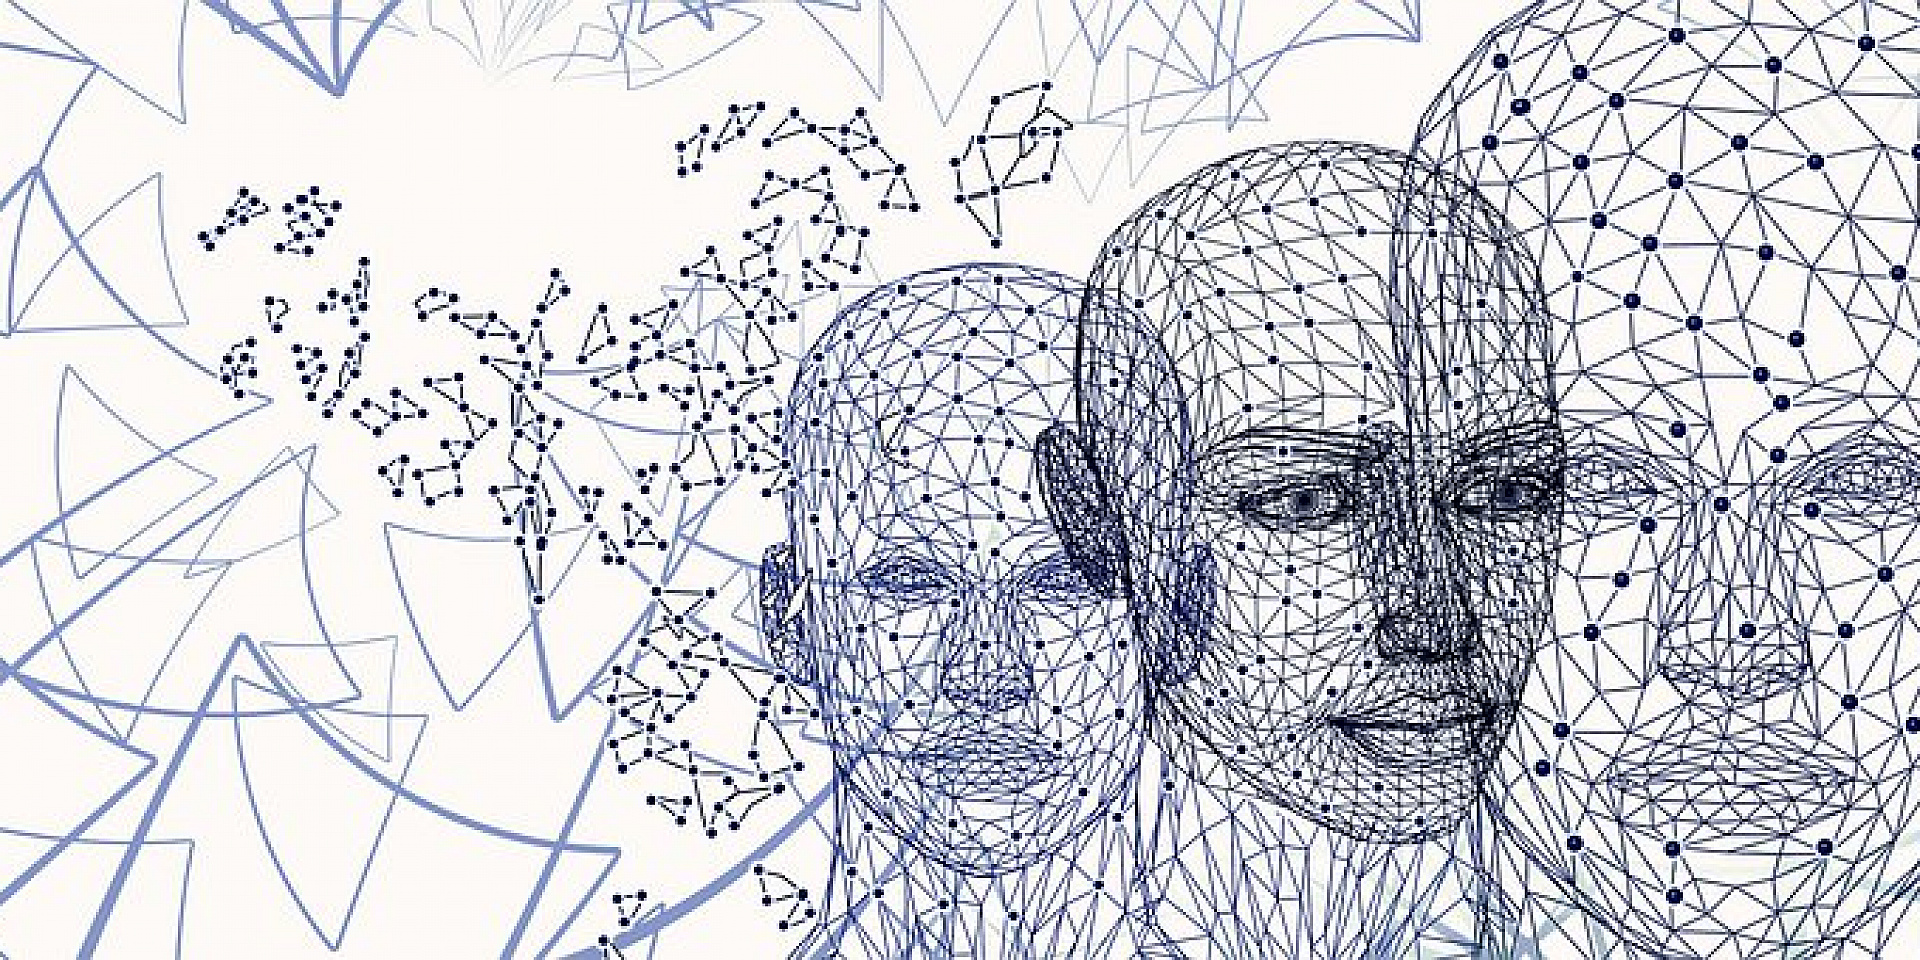 Illustration of human faces created by connecting fibers.